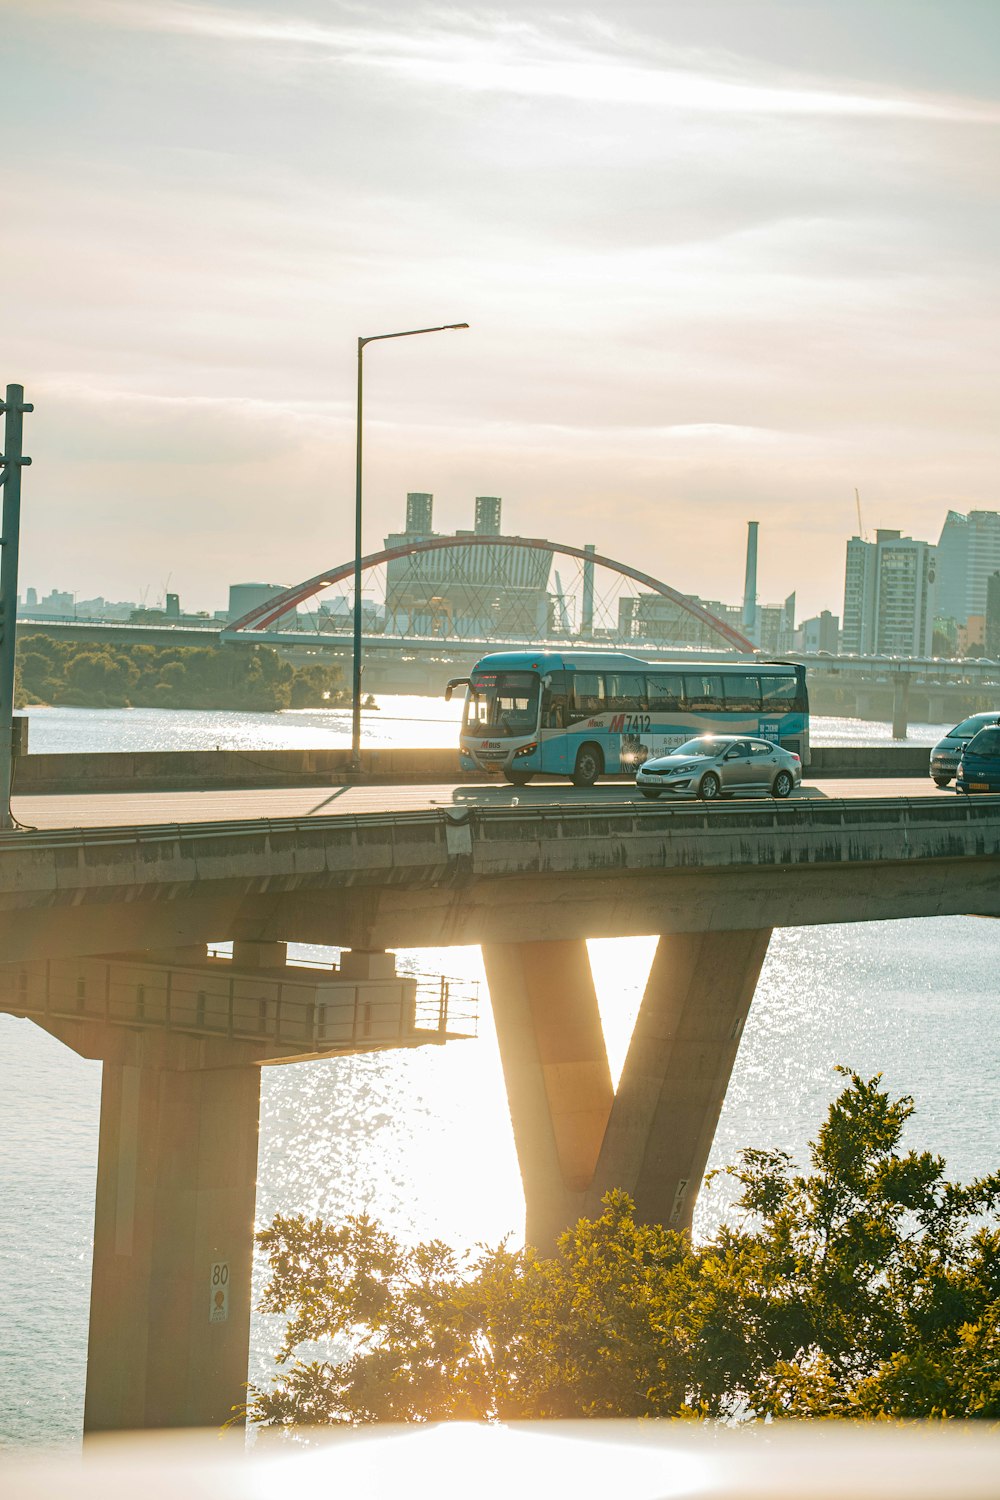 a bus and a car on a bridge over a body of water